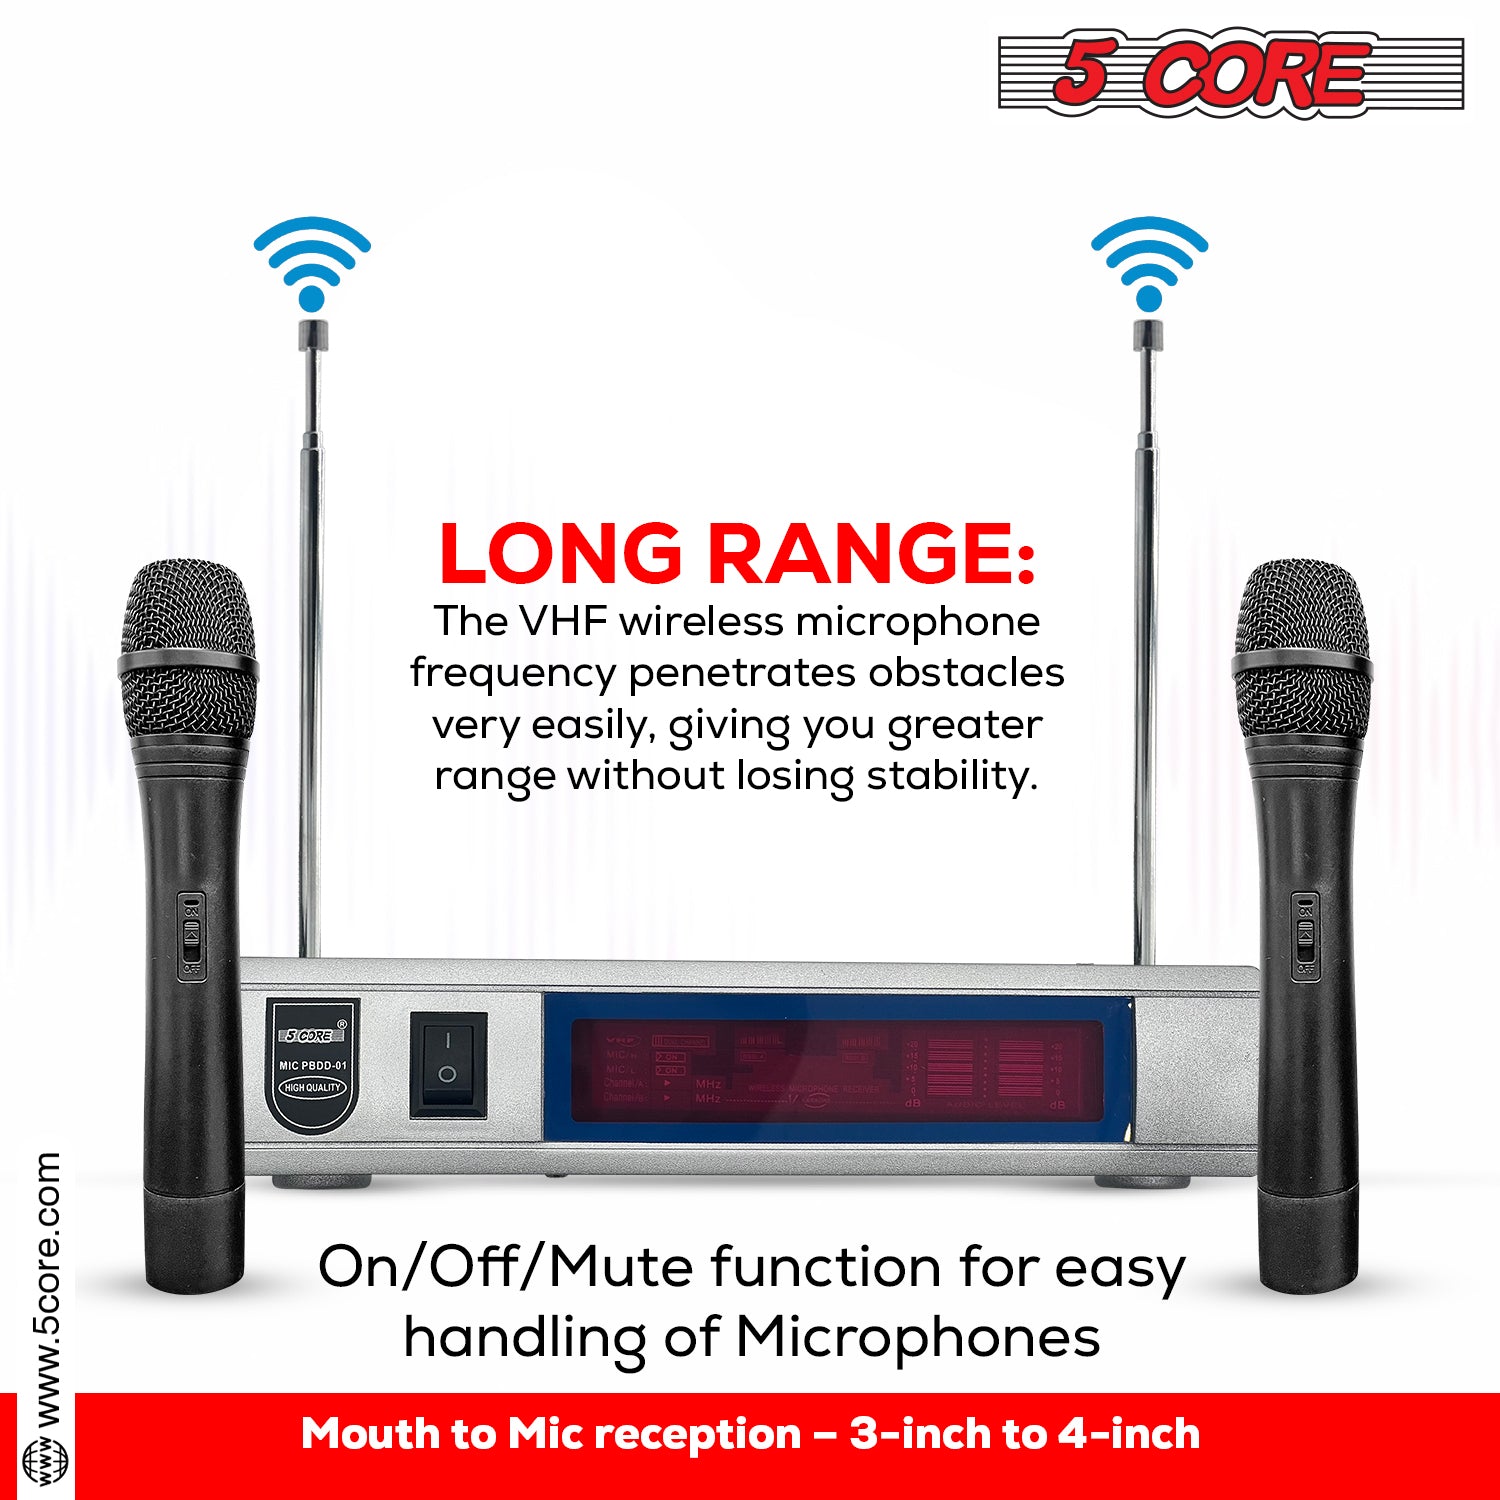 5 Core Professional Wireless Microphone System VHF Fixed Dual Frequency Microfono Inalambrico 100FT Range 2 Handheld Mics